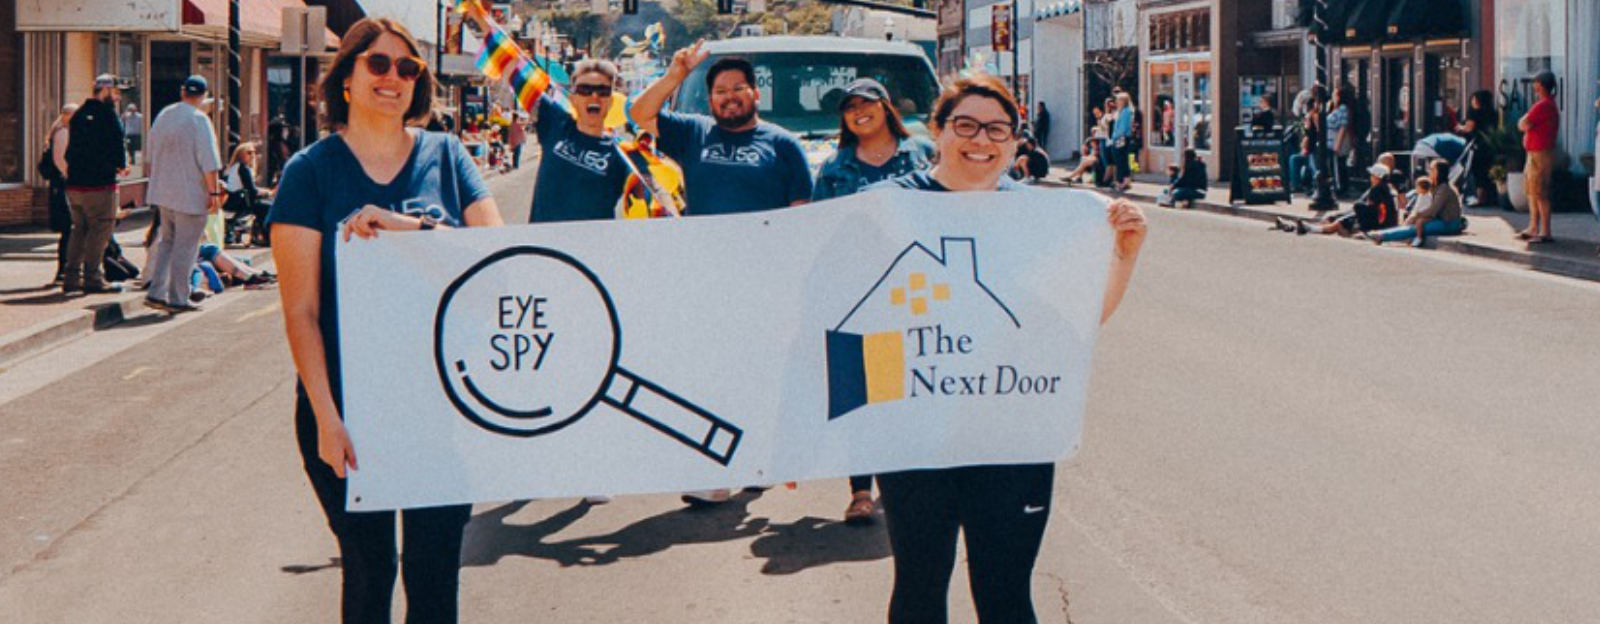 A group of people in a parade hold a banner saying The Next Door.